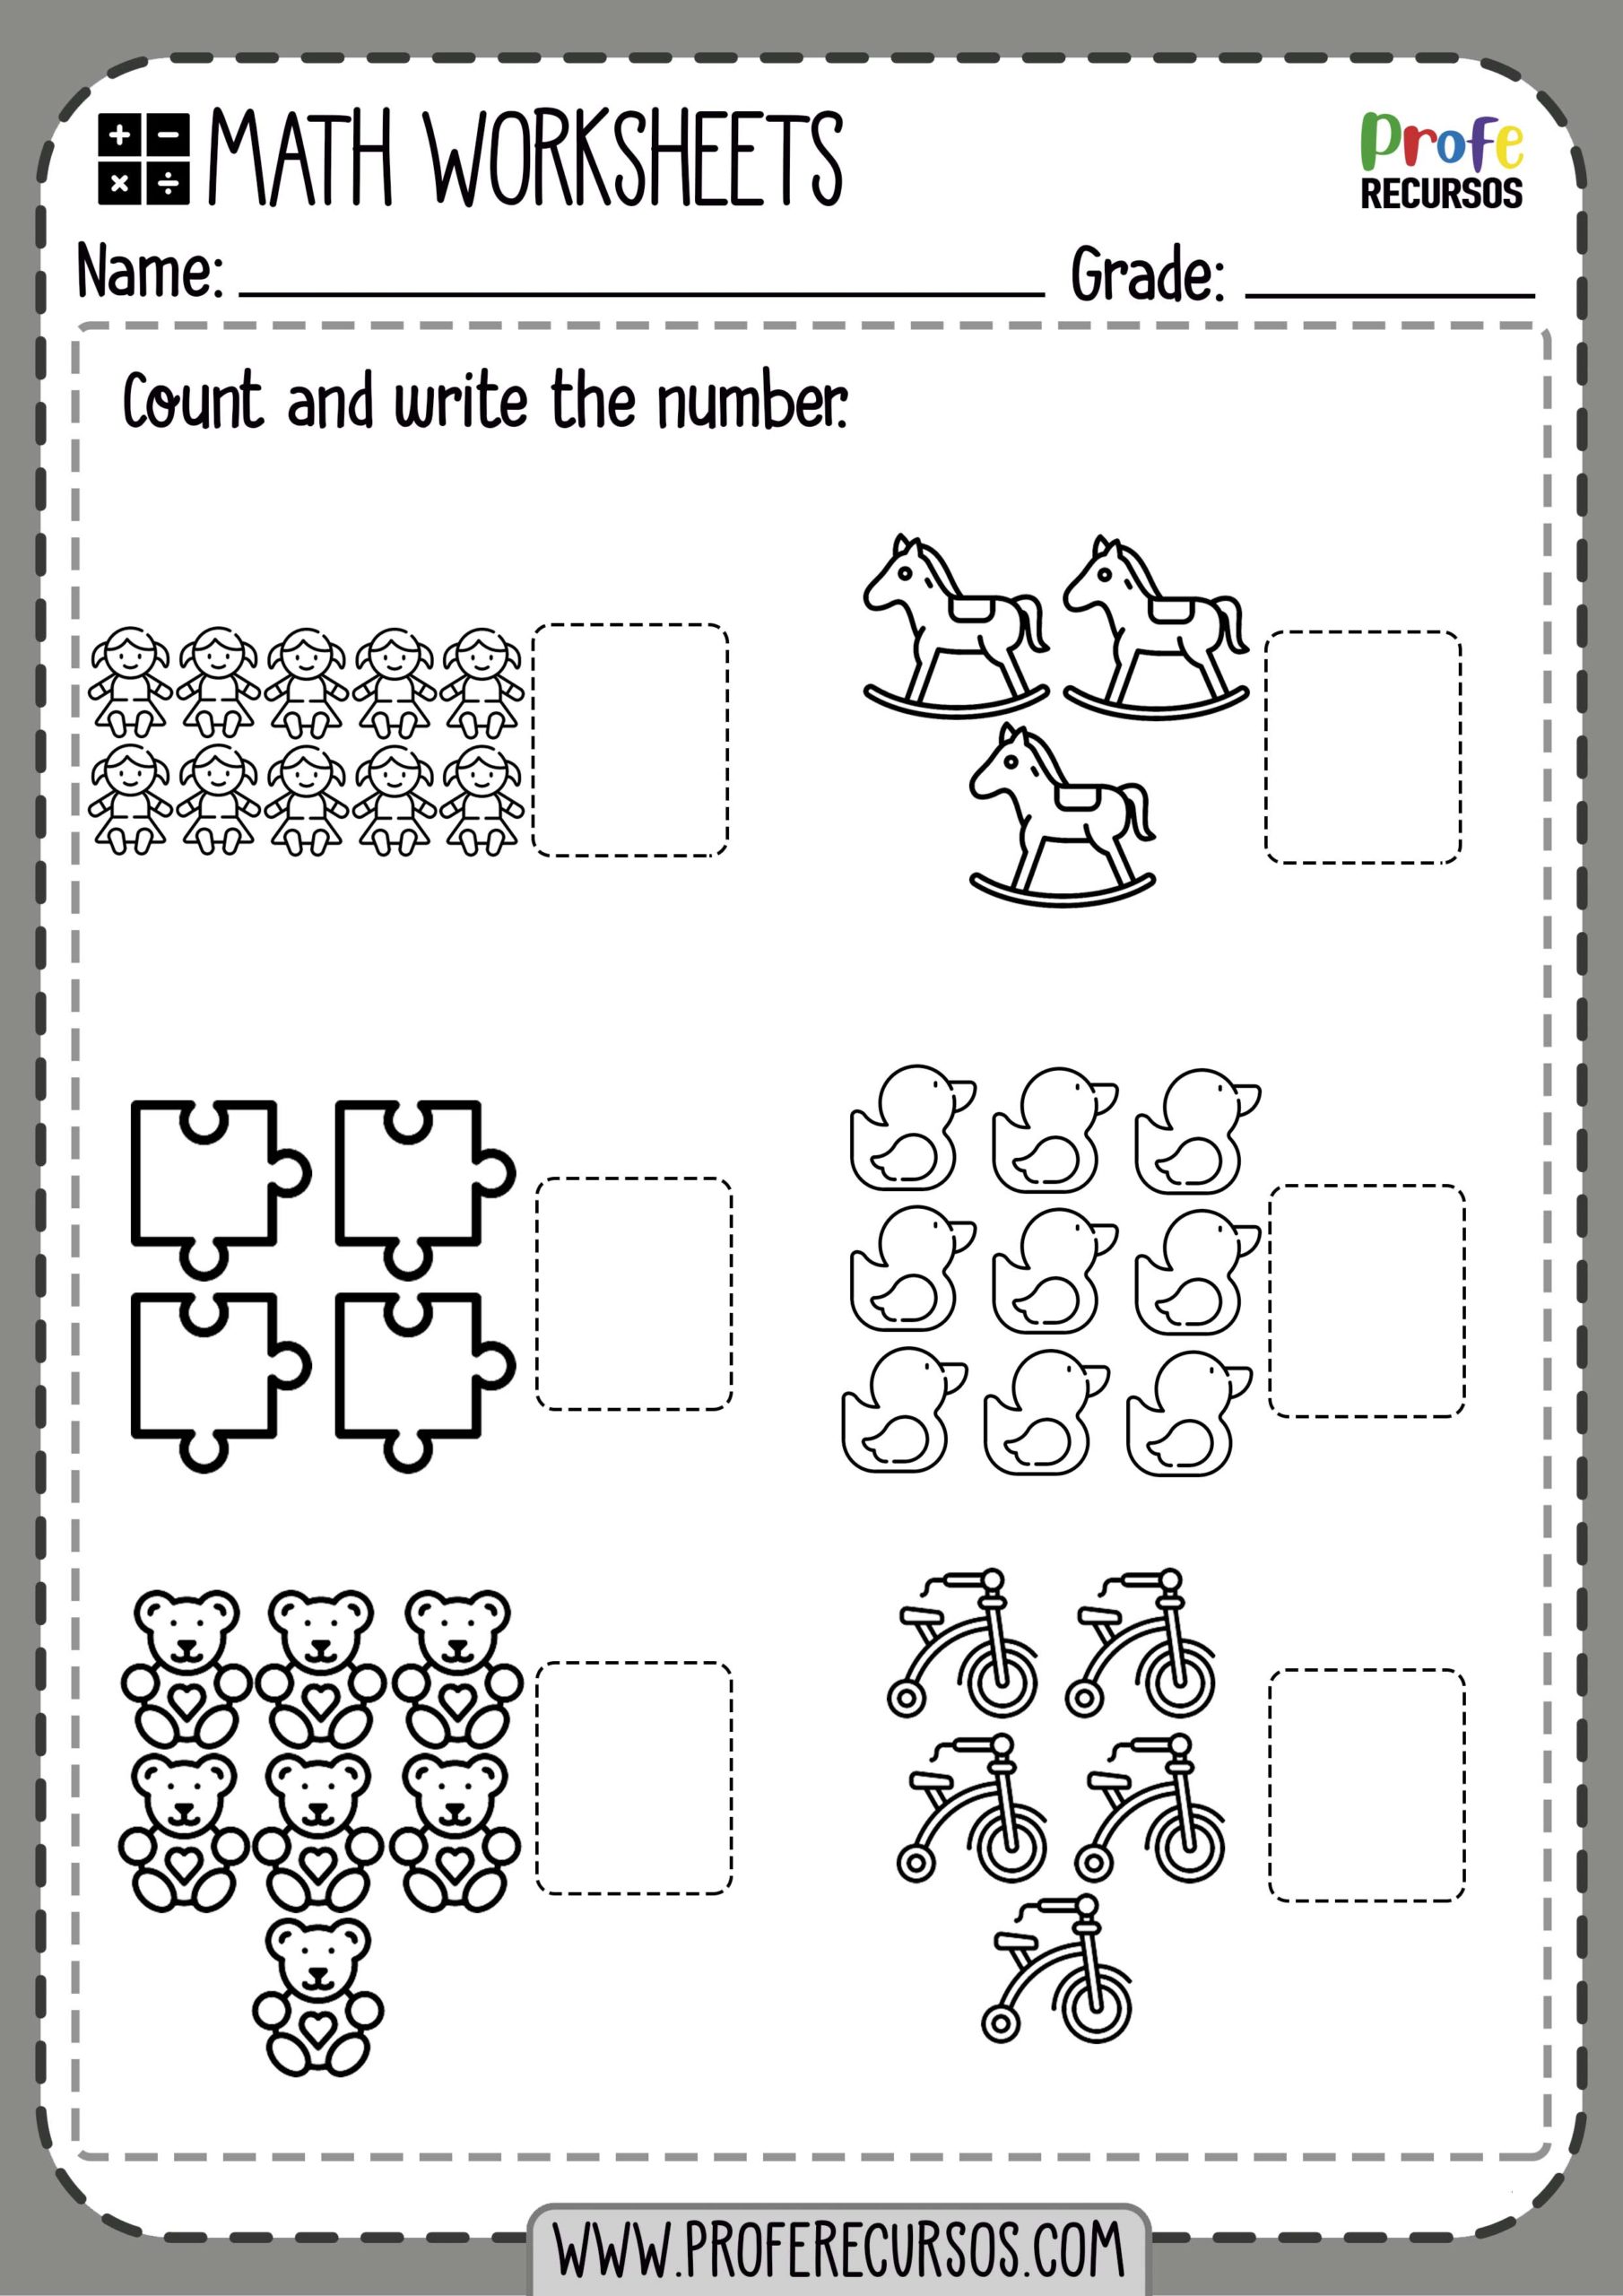 Kindergarten Worksheets Counting Worksheets Count The Counting 